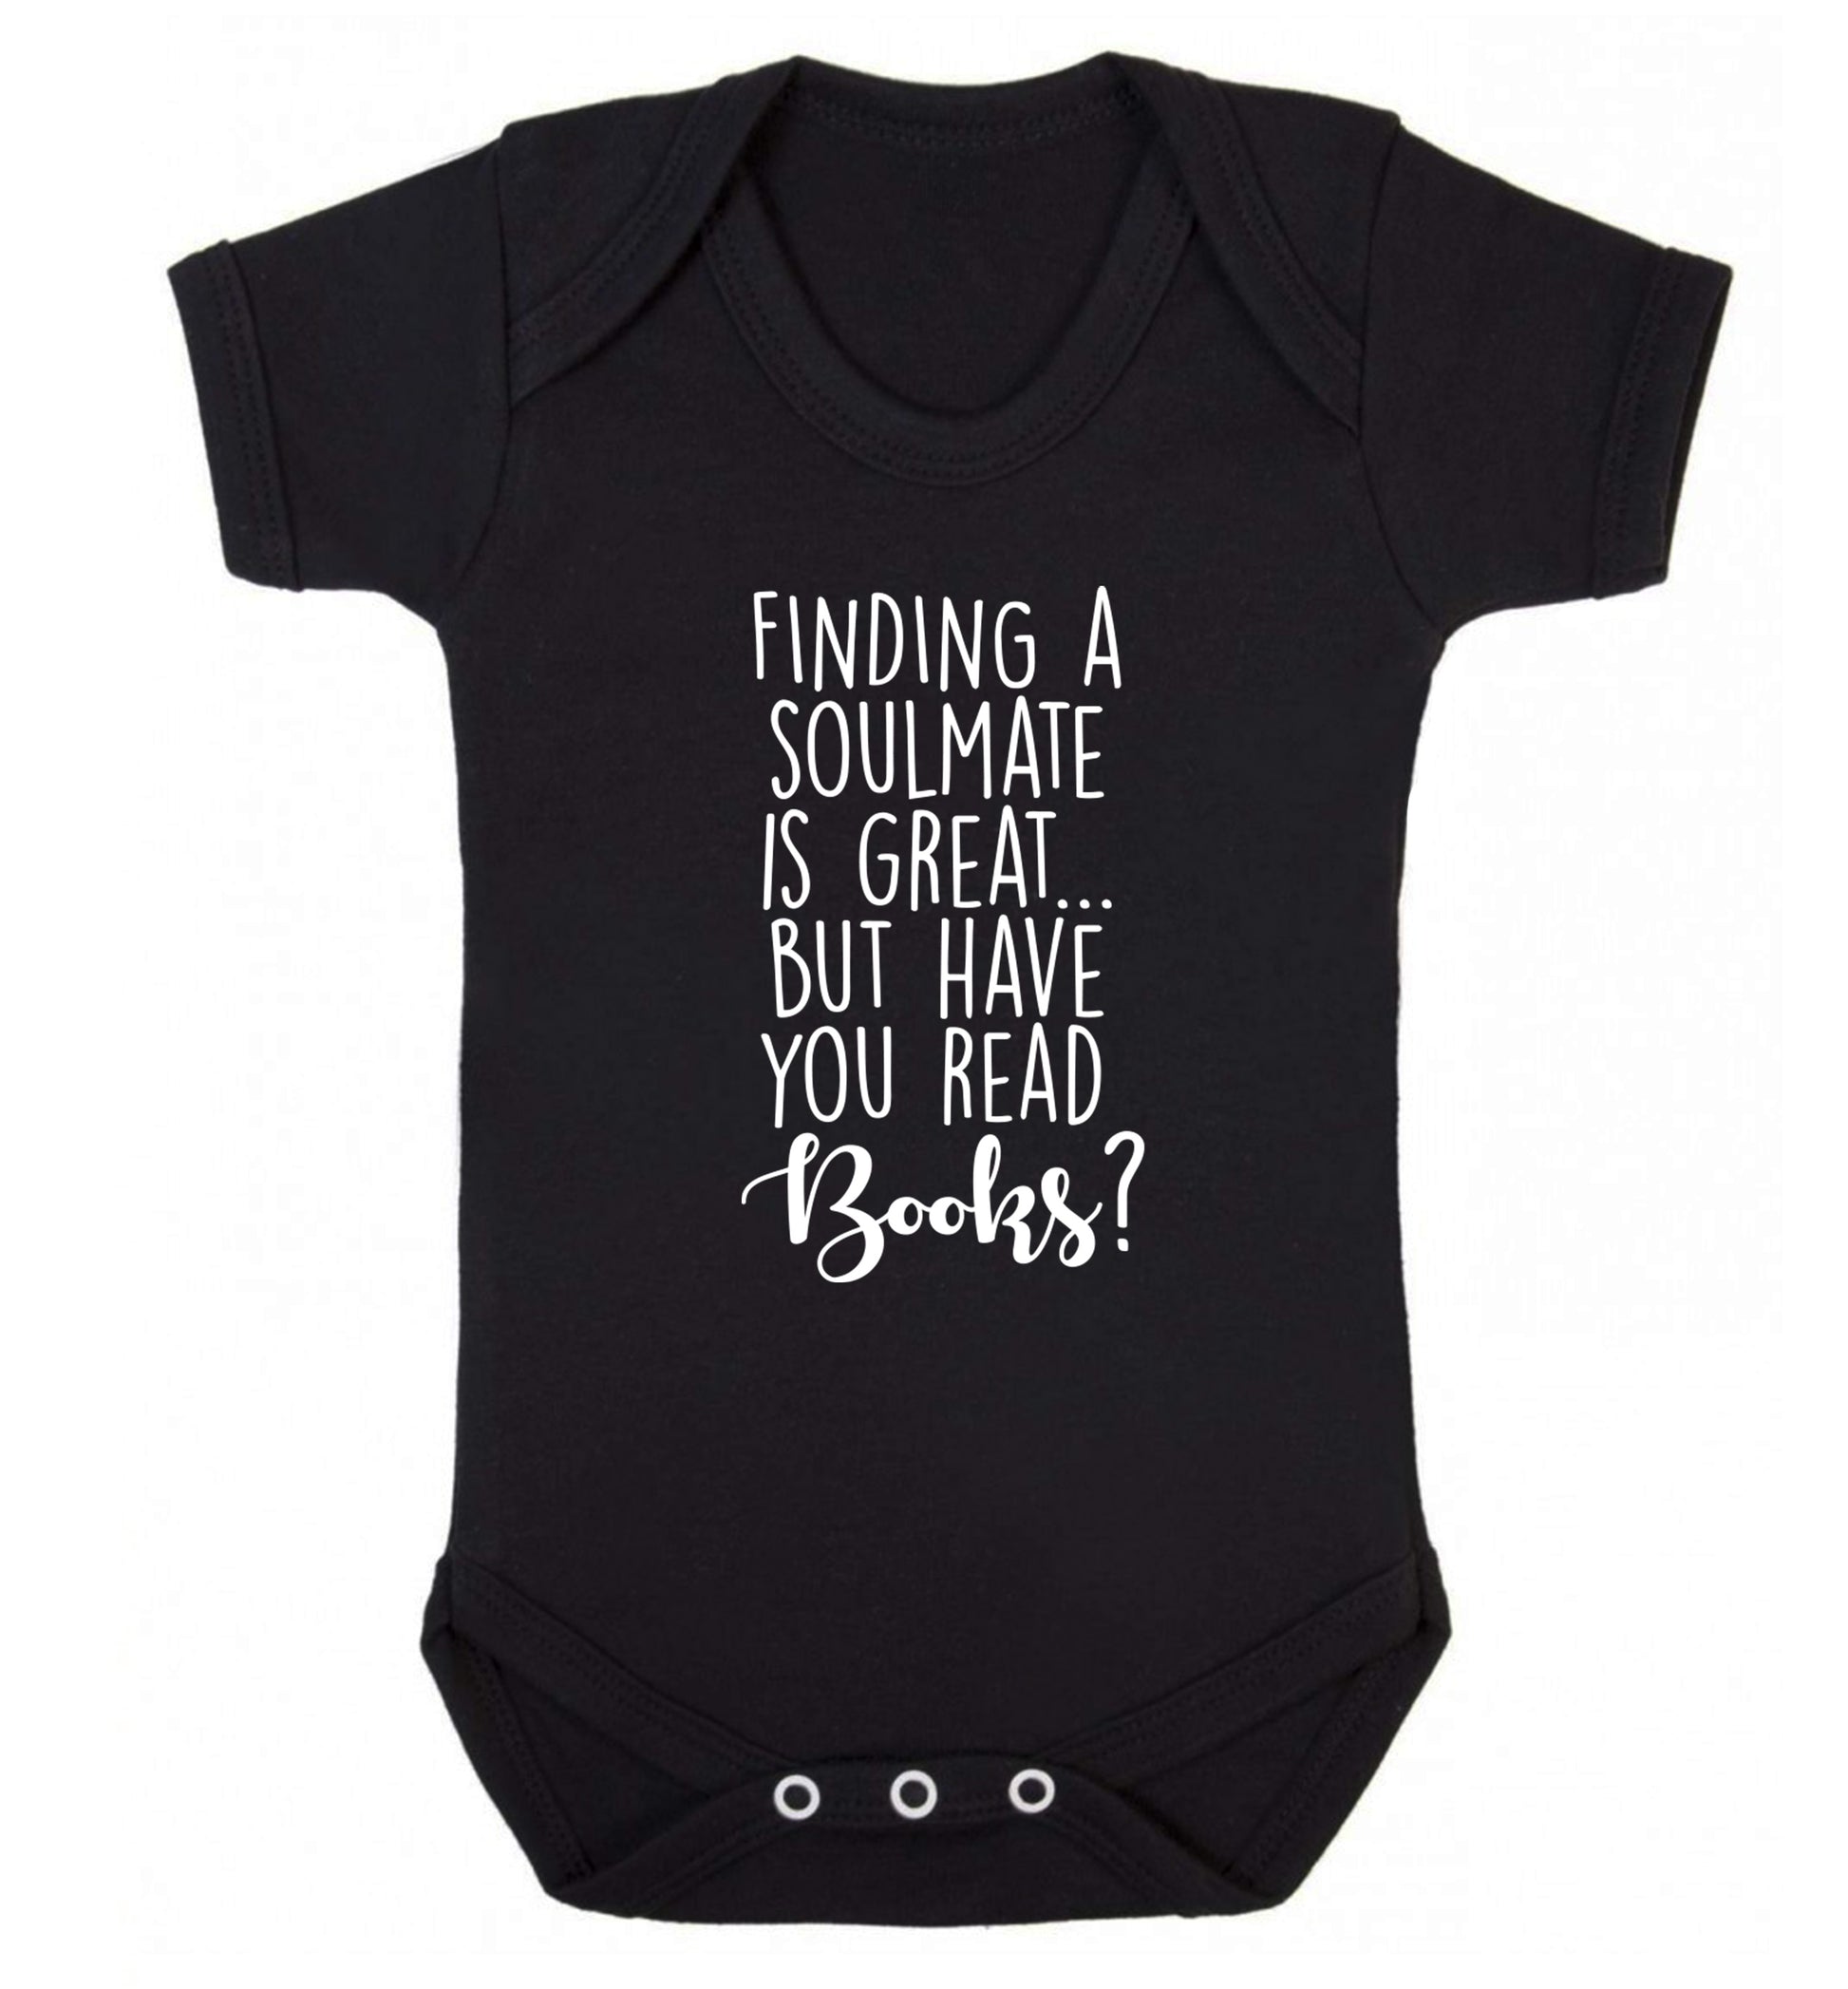 Finding a soulmate is great but have you read books? Baby Vest black 18-24 months